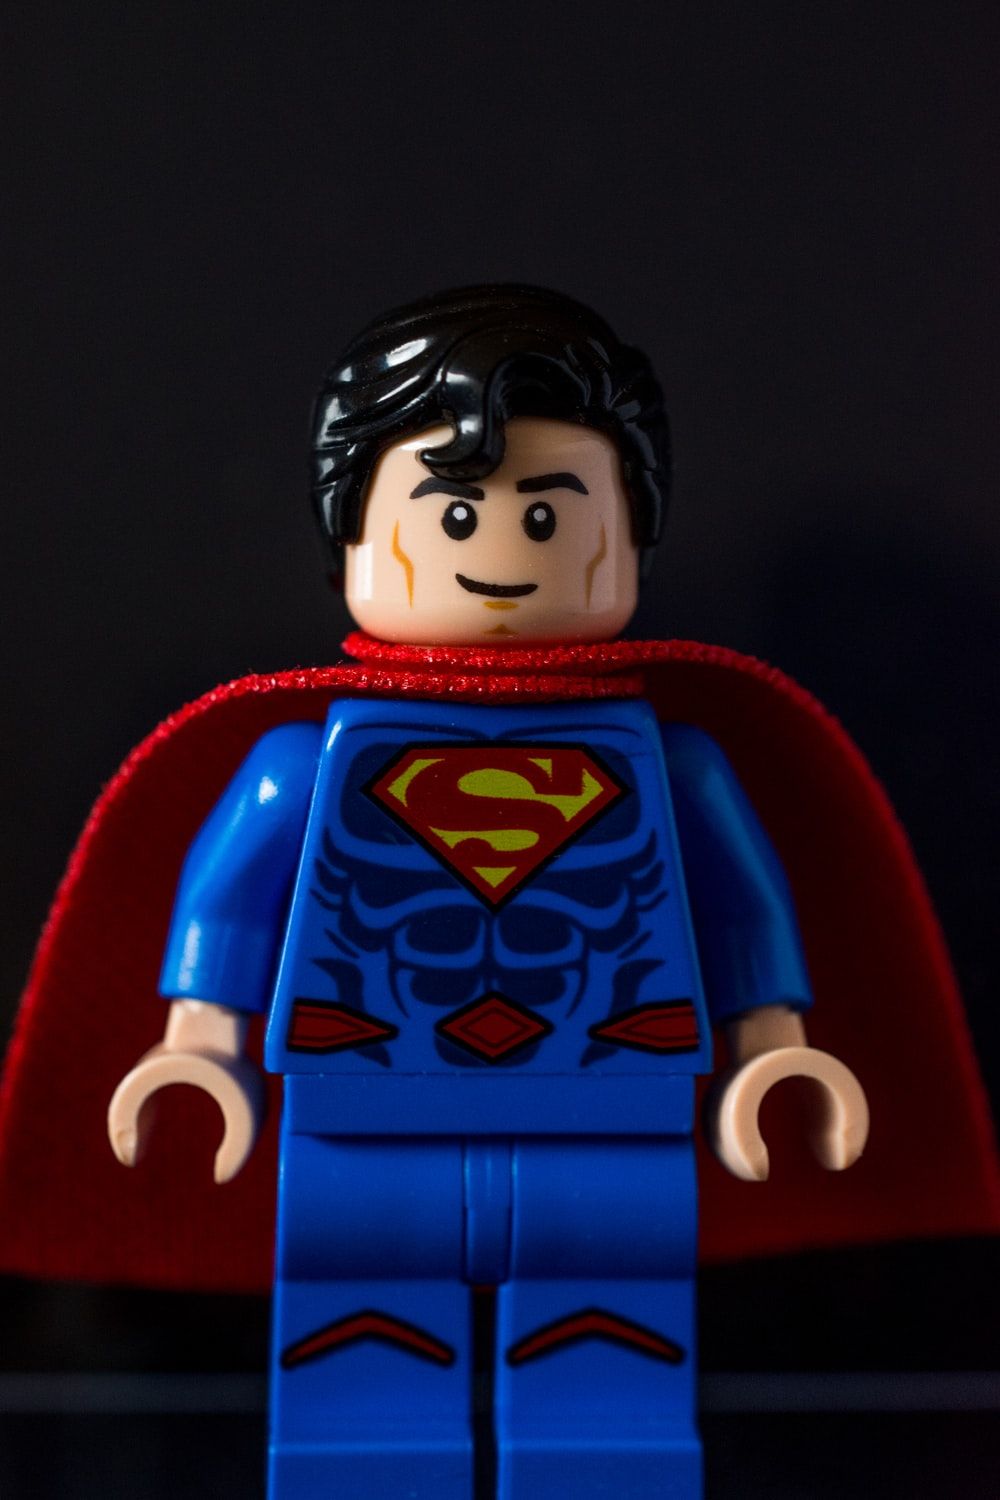 Superman Lego Picture. Download Free Image